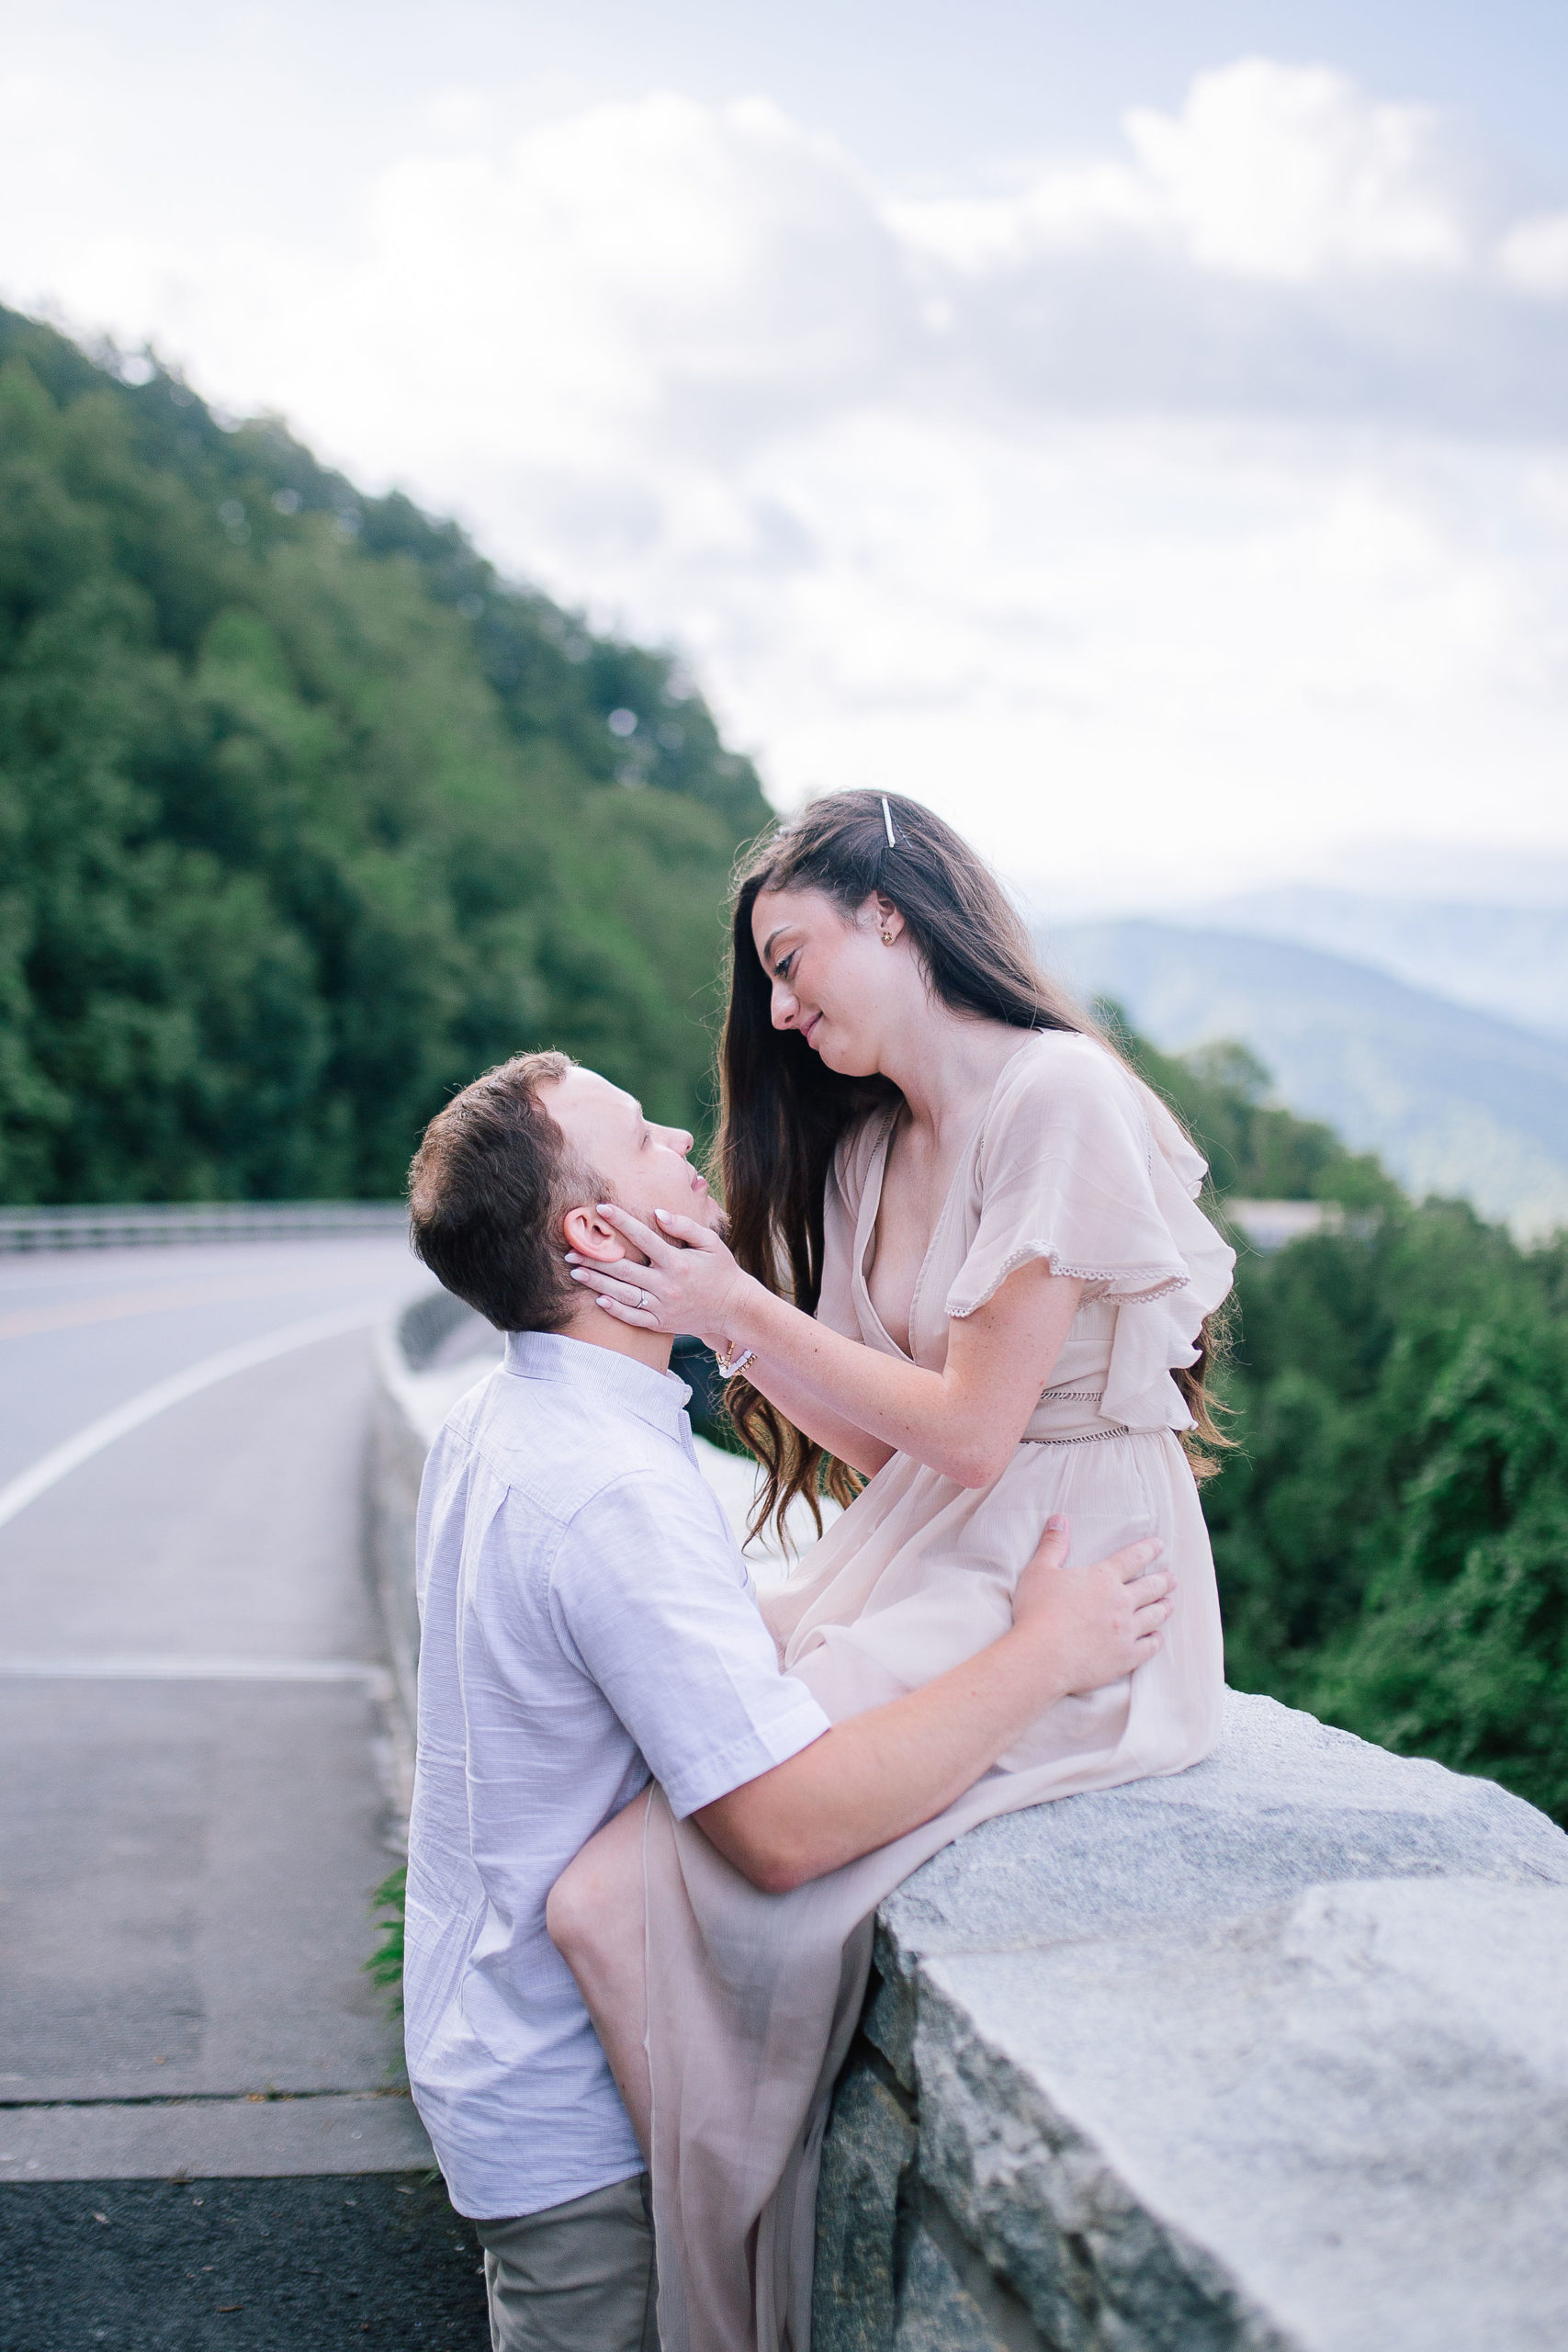 smoky mountain foothills adventure session for engagements. Bride sitting on a stone wall while her groom holds her legs and they look out on the Foothills